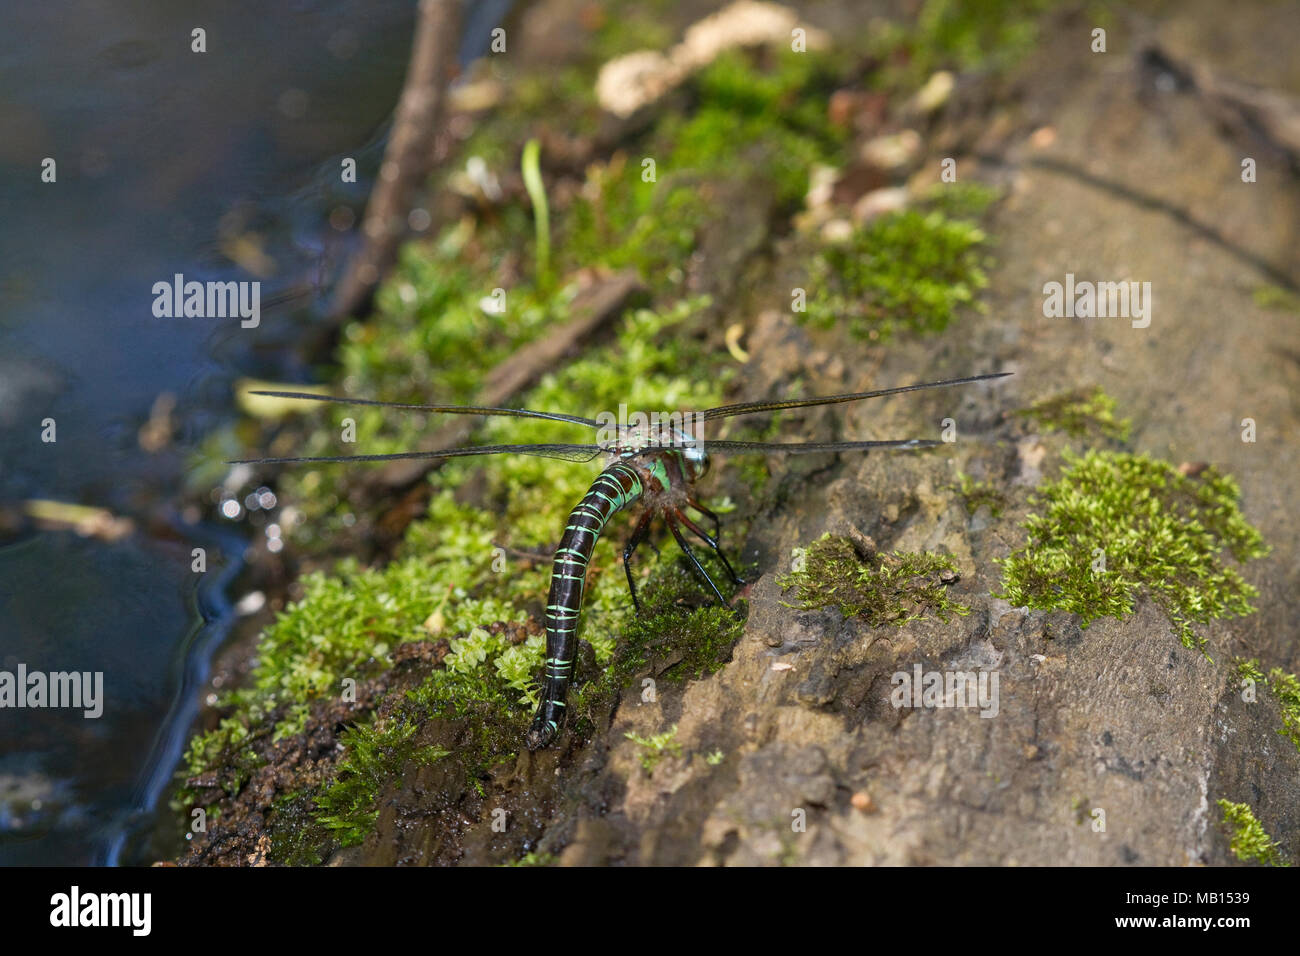 06370-00203 Swamp Darner (Epiaeschna heros) female ovipositing laying eggs on log in water, Marion Co., IL Stock Photo